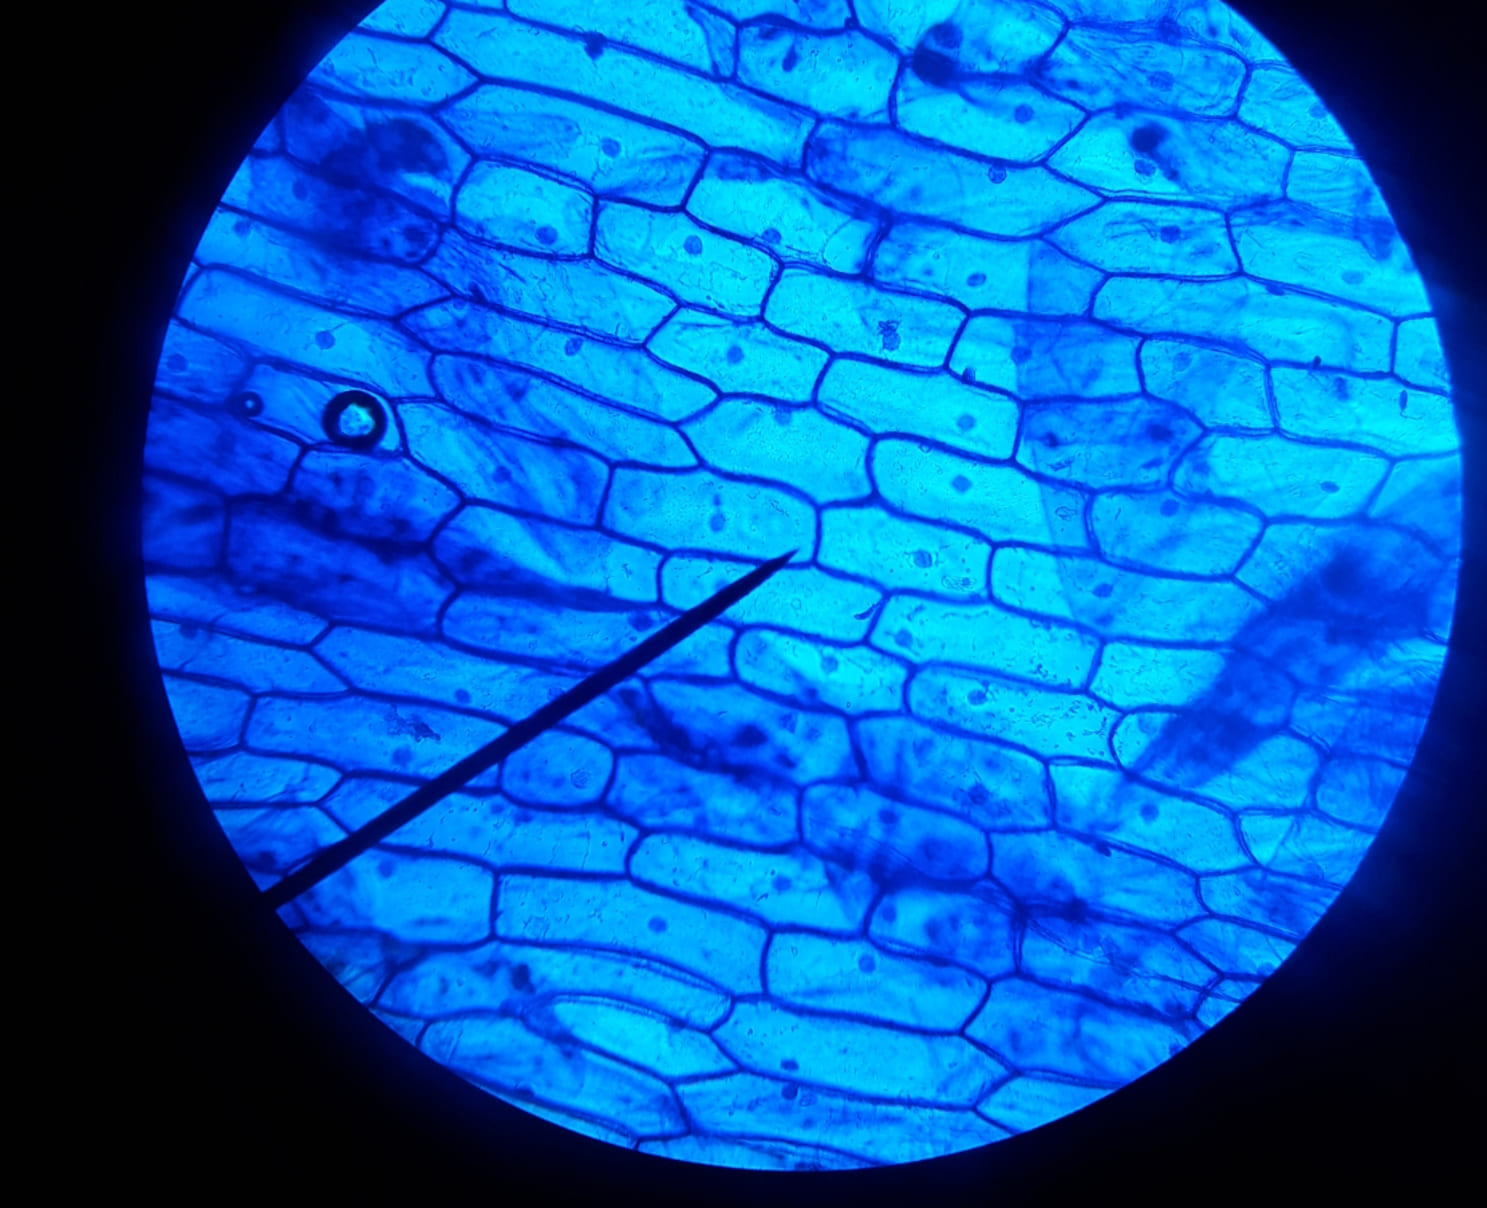 The photograph shows the epidermis tissue of the onion, which is ideal for visualising the rectangular shape of the plant cells. The cell wall, which is unique to onions and which delimits each of the cells, is clearly visible.